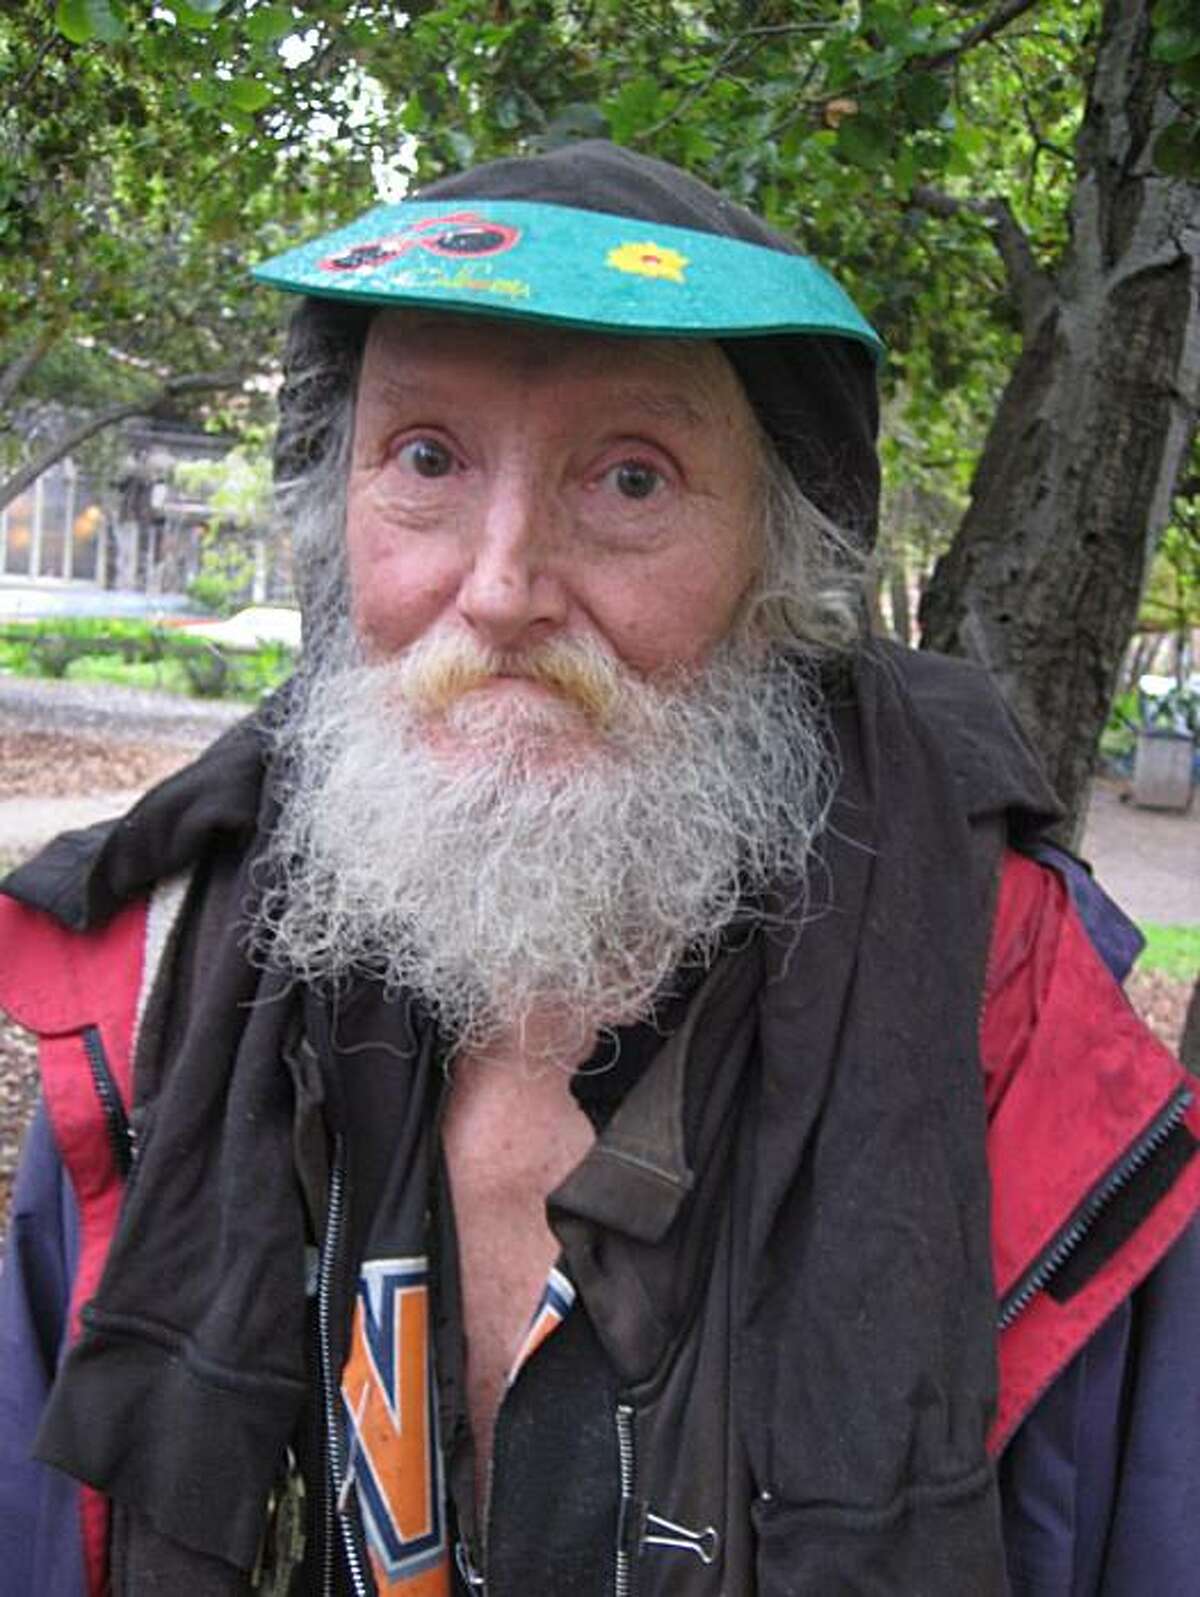 The Hate Man, 73, has been a well-known homeless character for more than two decades on Telegraph Avenue in Berkeley.